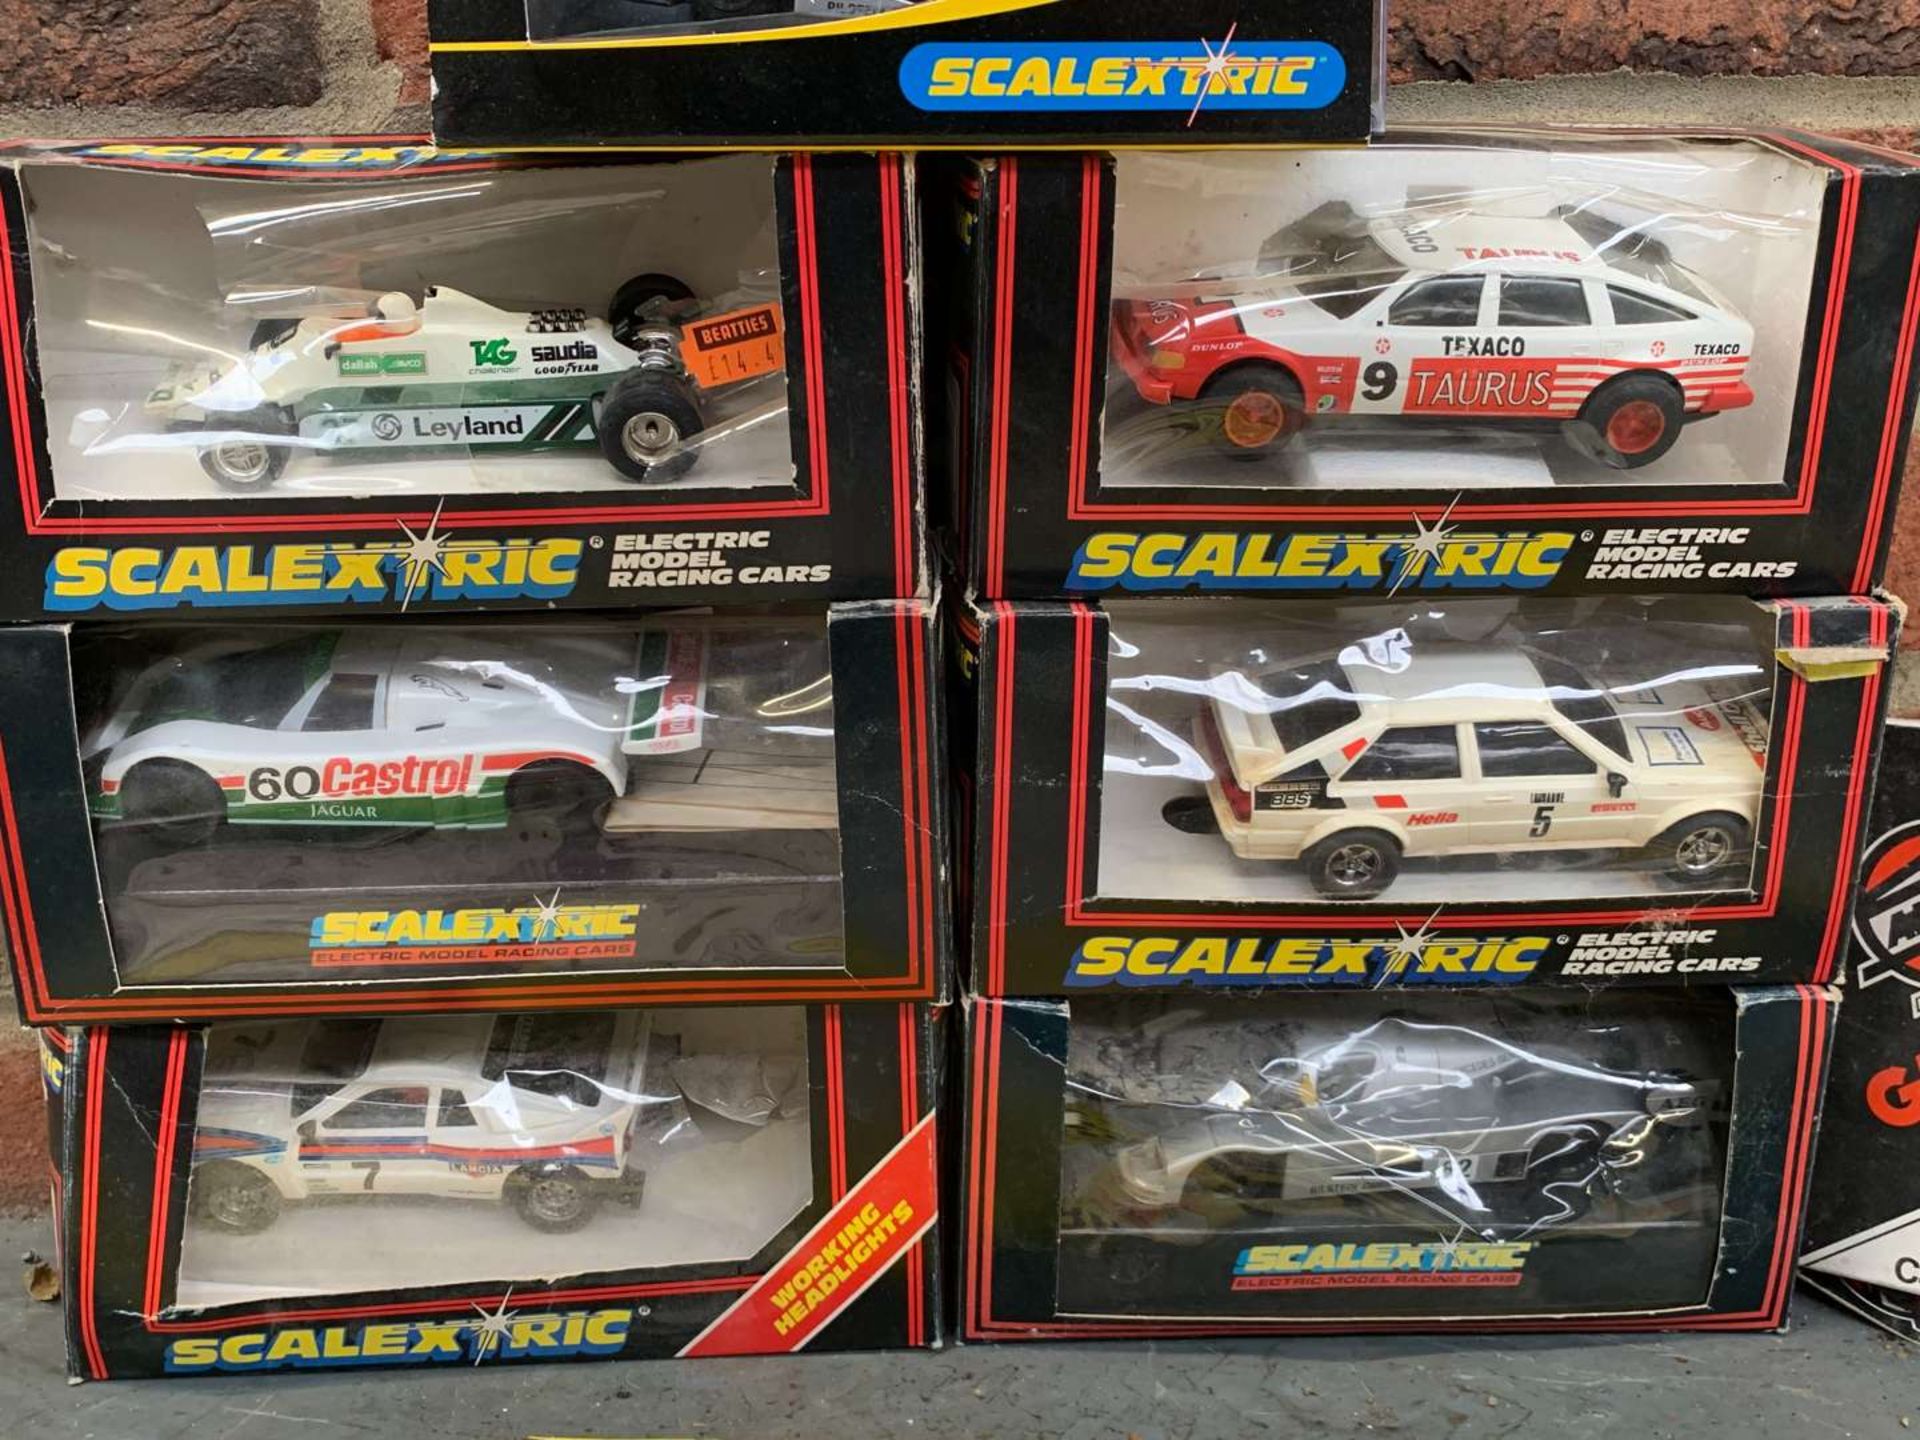 7 Scalextric Model Cars &amp; Airfix Kits - Image 5 of 6